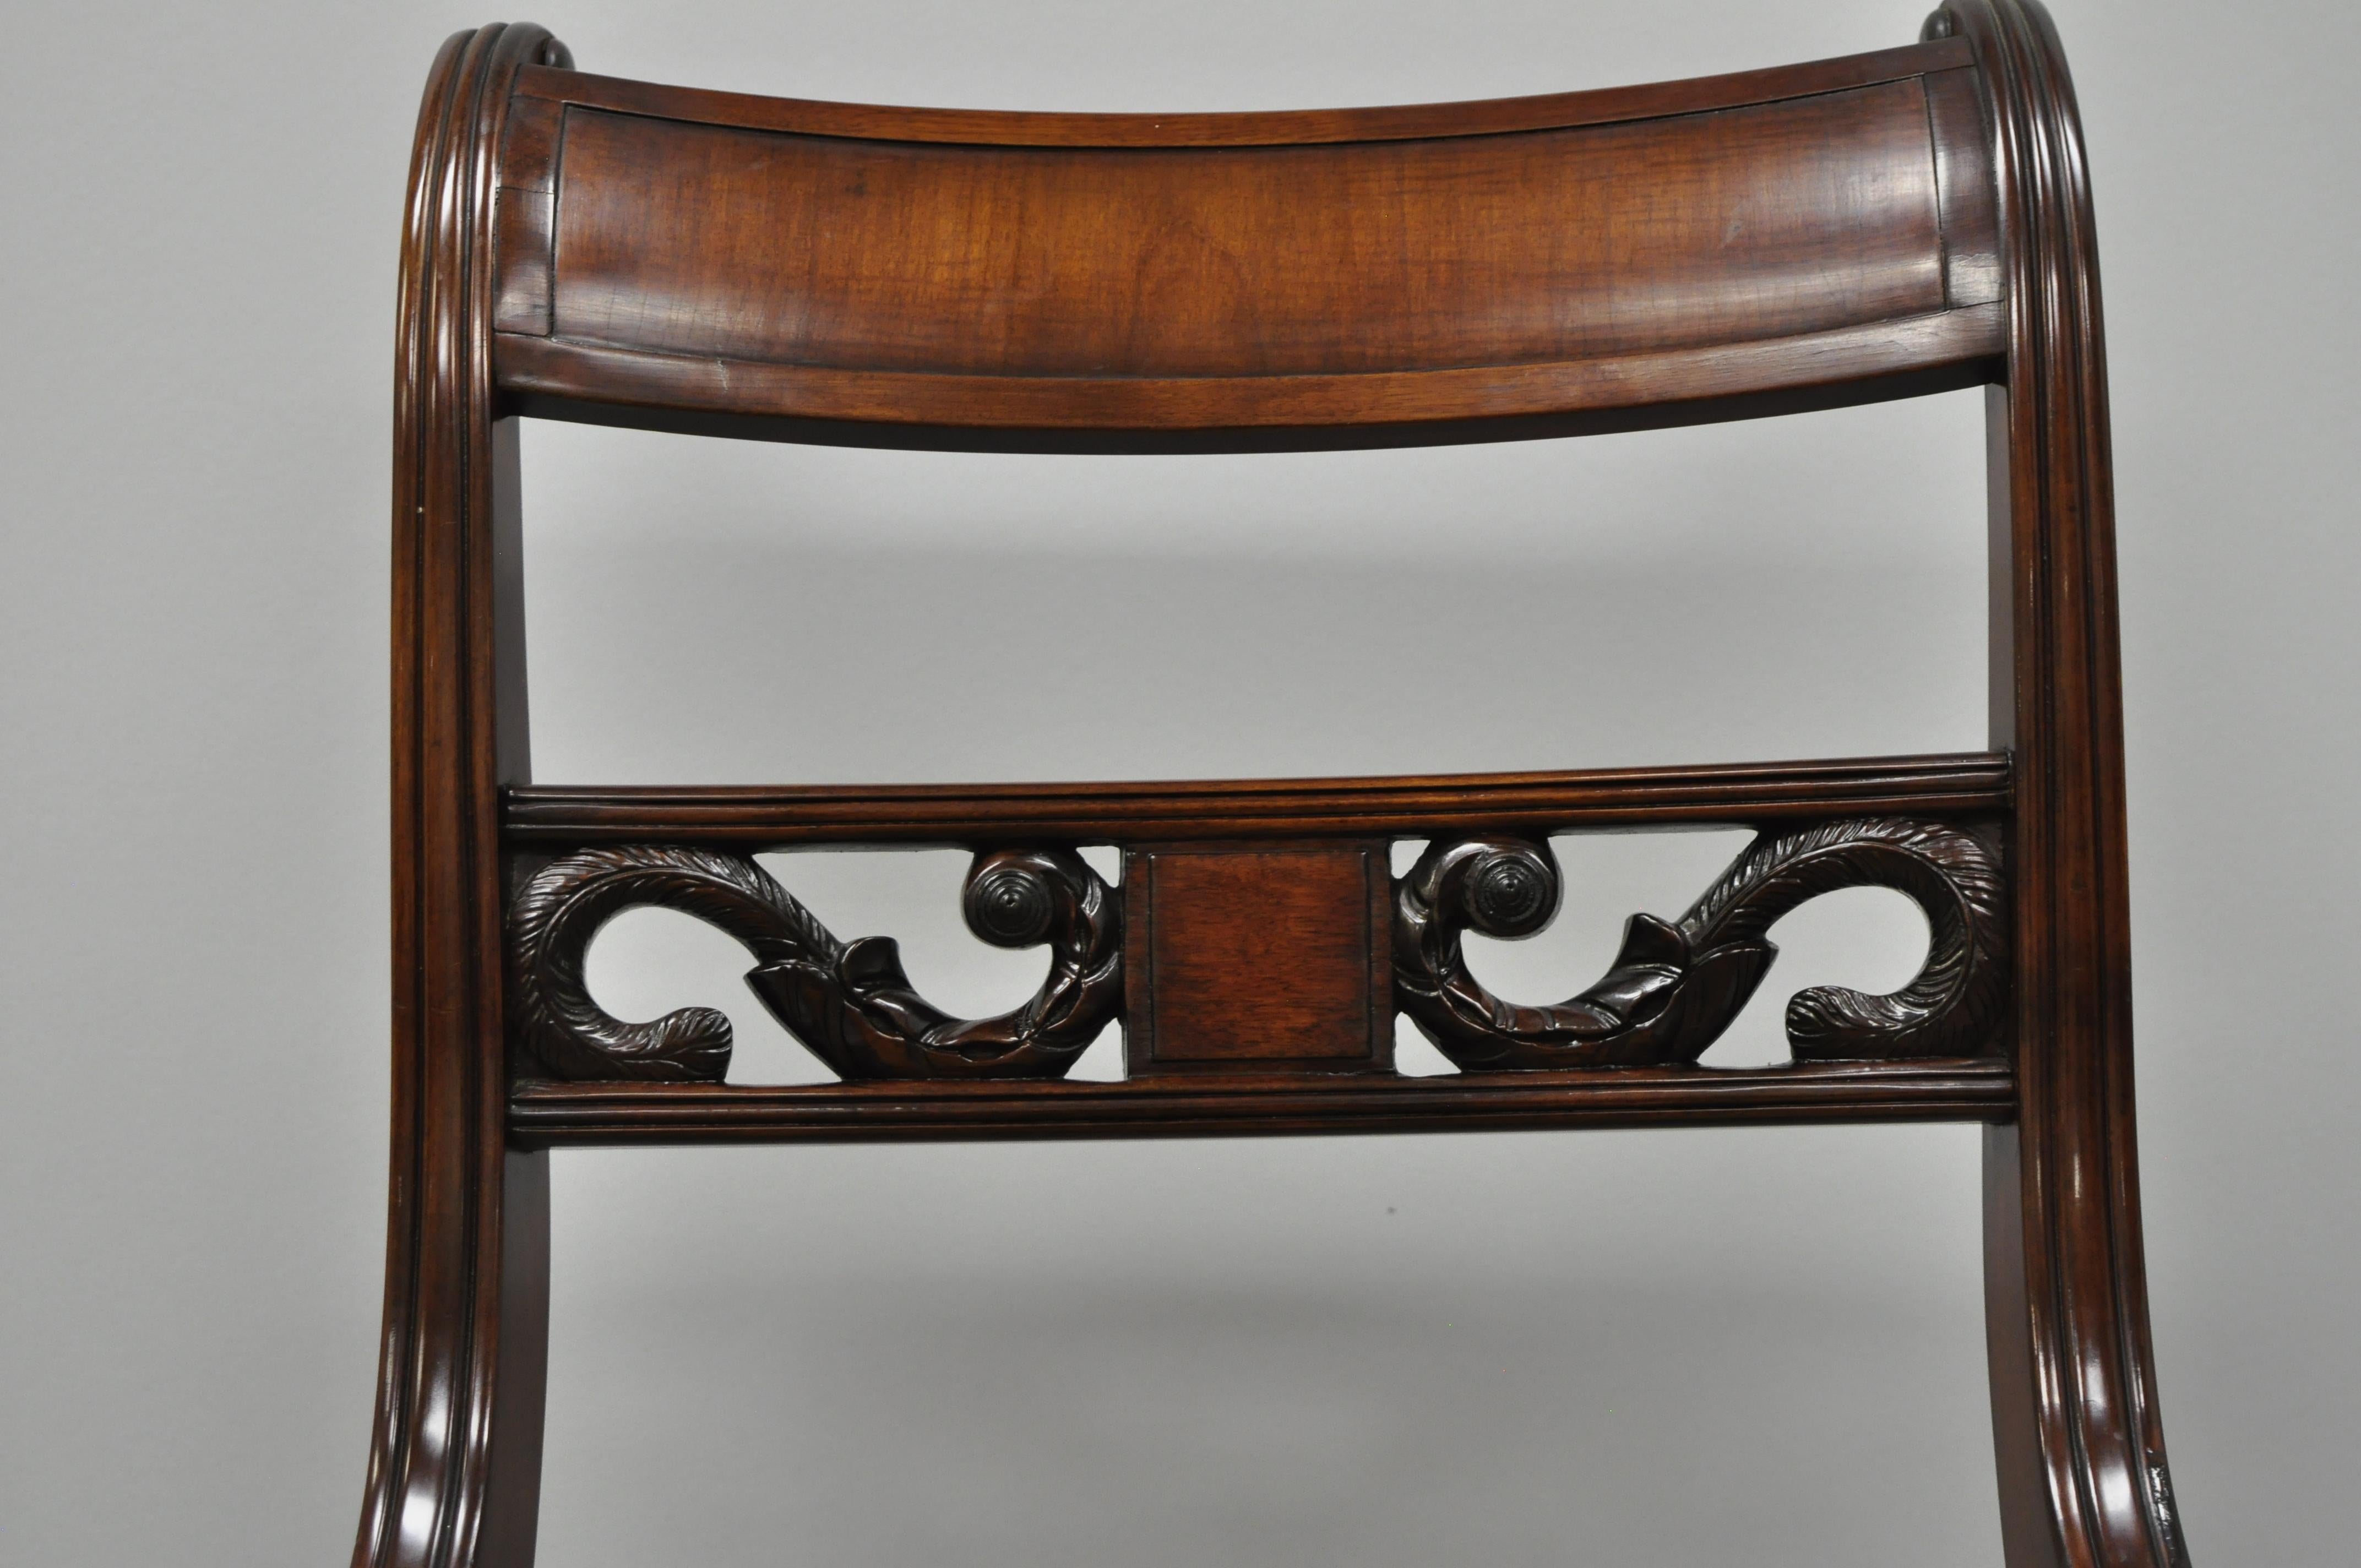 20th Century Four Mahogany Carved Plume & Acanthus Regency Style Saber Leg Dining Side Chairs